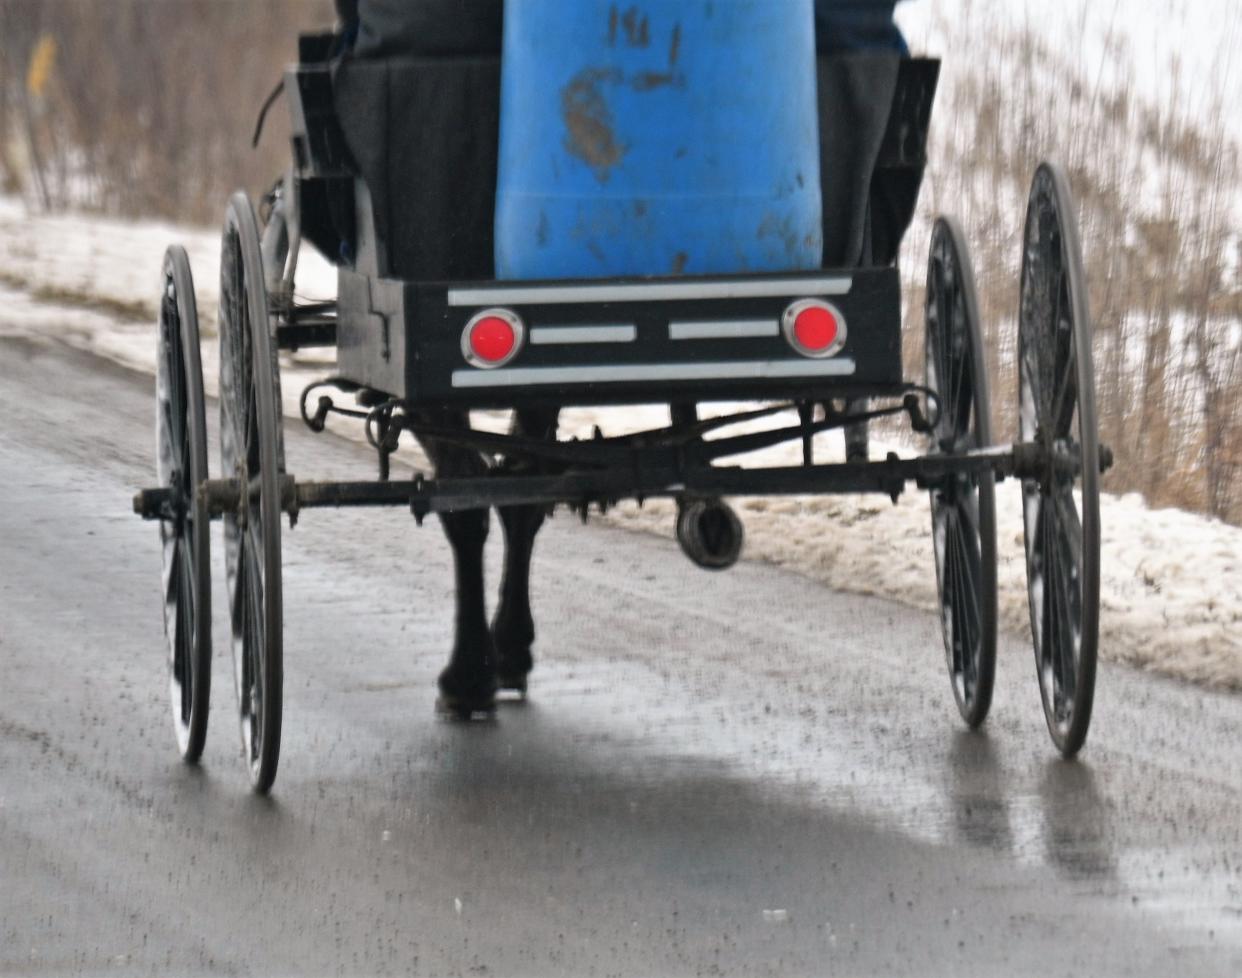 Two siblings were thrown from a horse-pulled Amish buggy Monday morning when a tractor-trailer truck crashed into them as they rode through rural Wisconsin, killing one of the occupants as well as the horse.